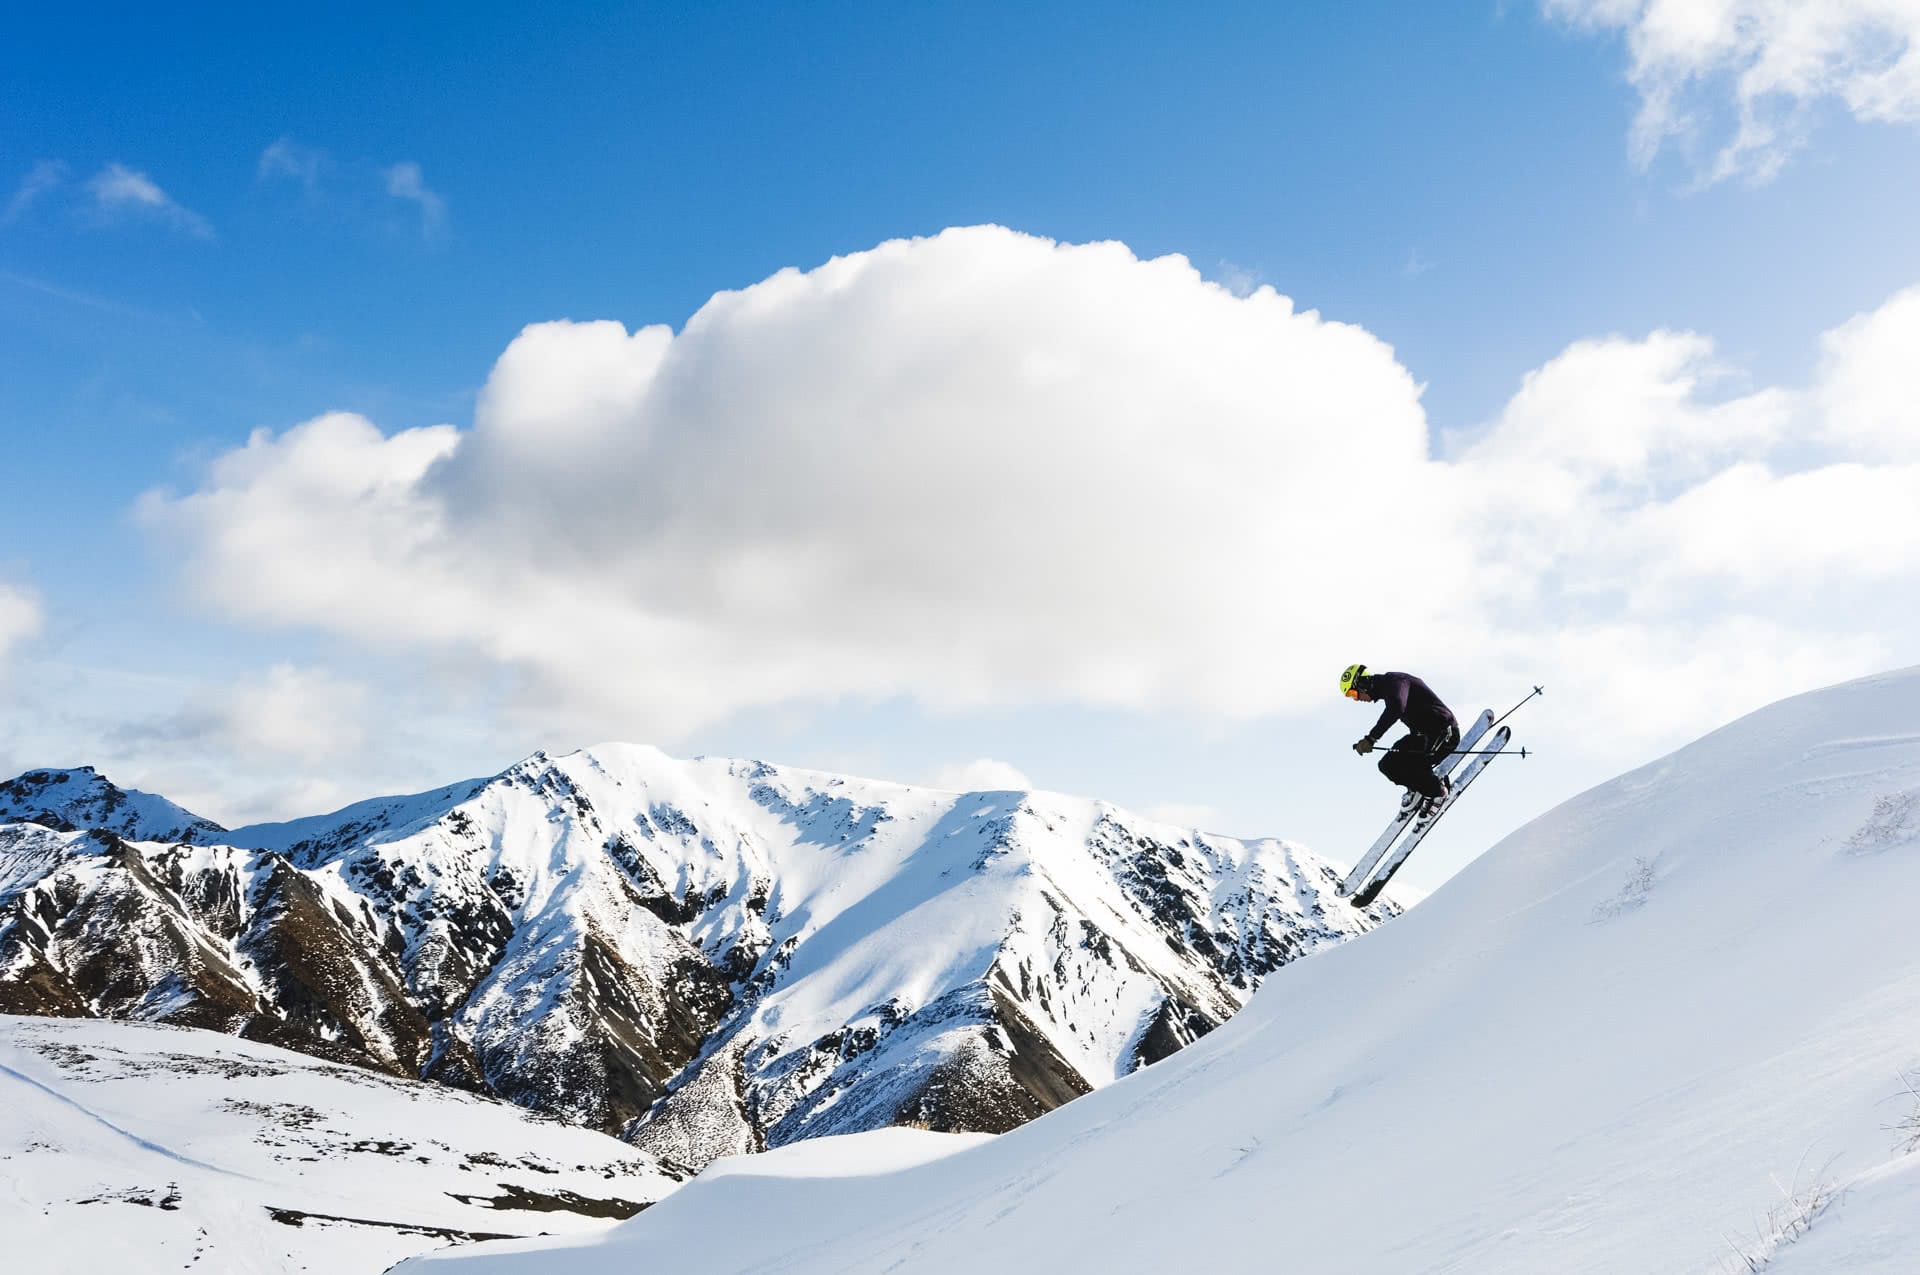 15 Taking the air at Mt Lyford, 24 Incredible Ski Fields & Resorts in New Zealand, Huw kingston, New Zealand, skiing, south island, jump